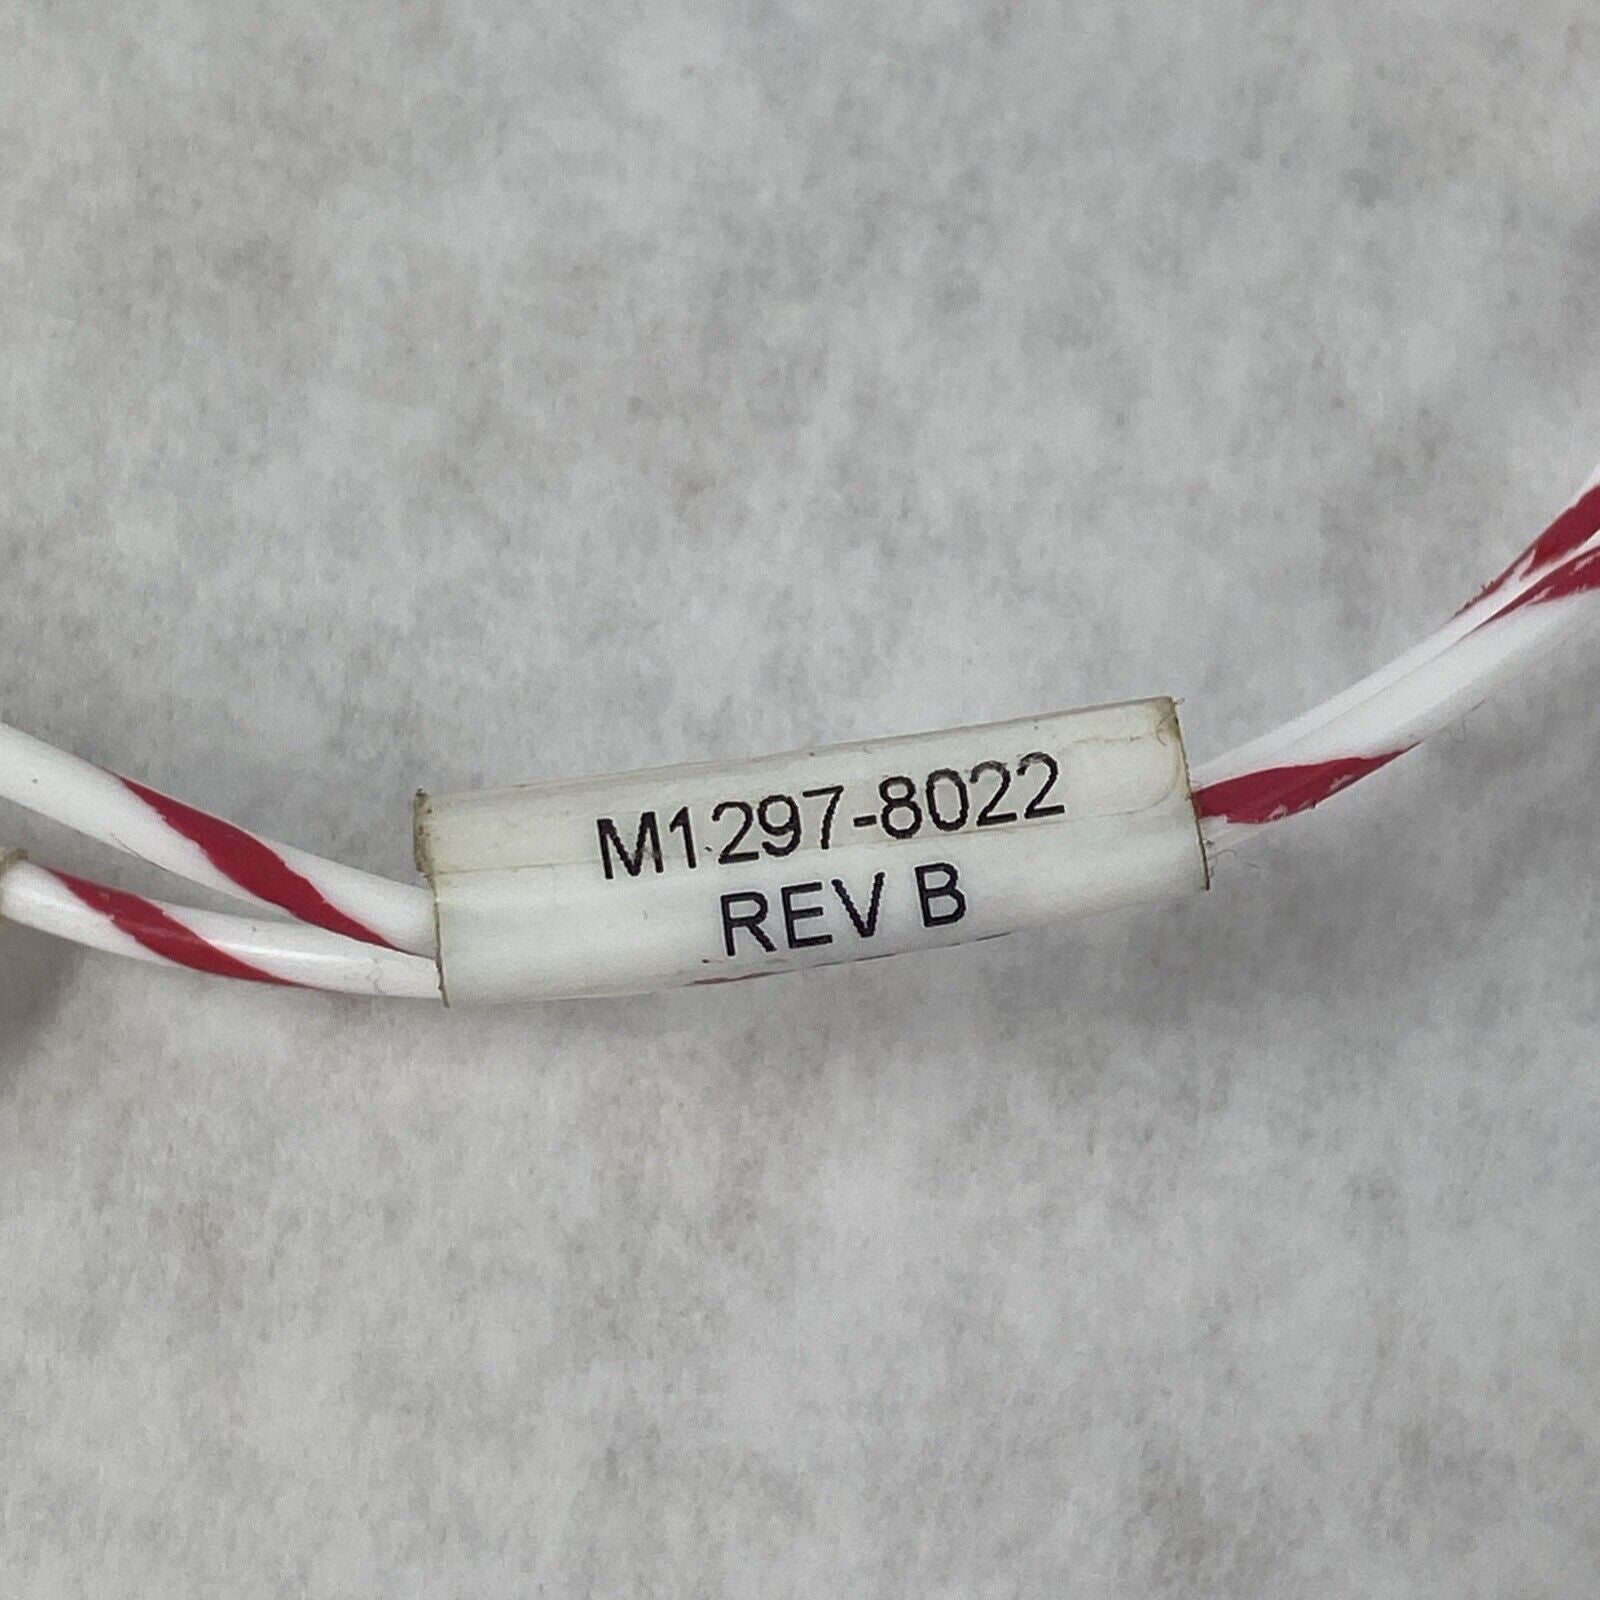 New Brunswick M1297-8022 Jettron Vessell Cable